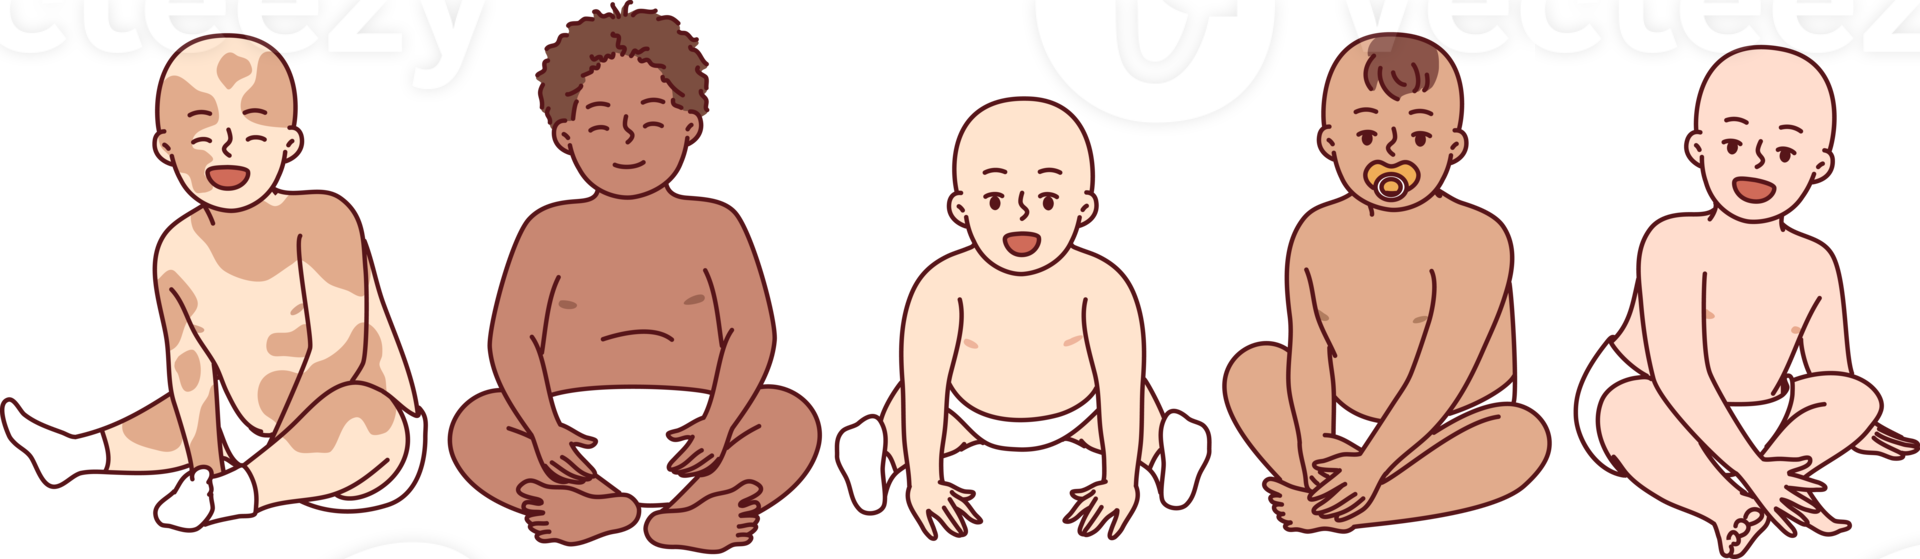 Diverse babies in diapers of different races and nationalities sit side by side png